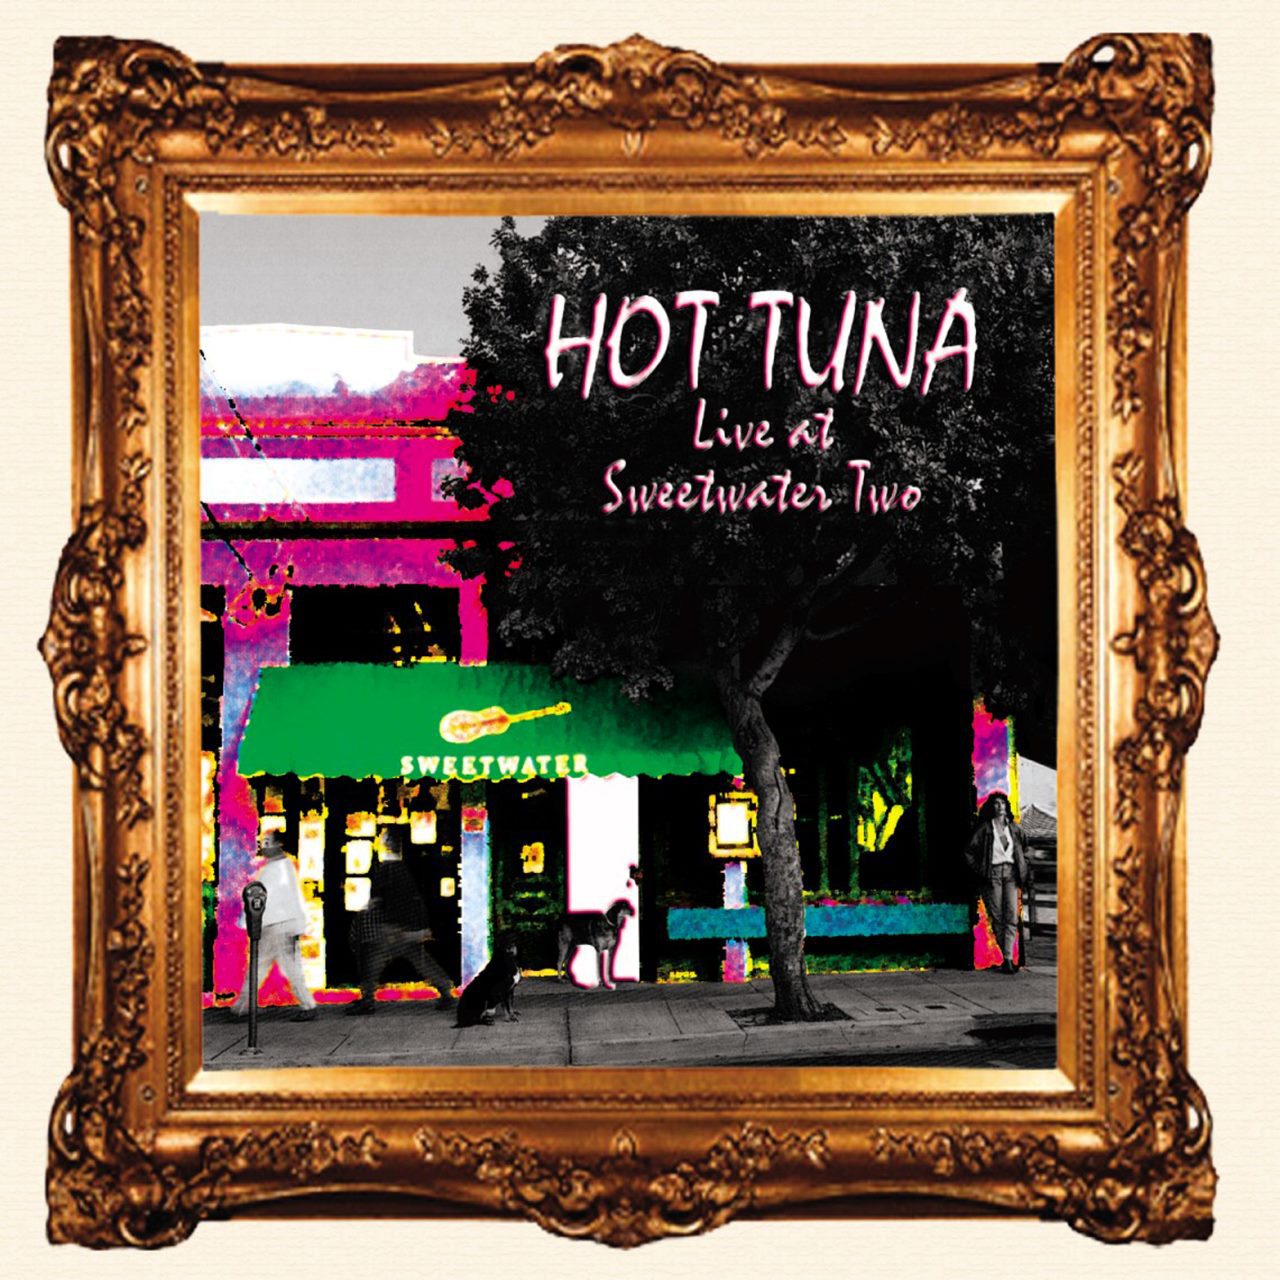 Hot Tuna – Live At Sweetwater – Two cover album